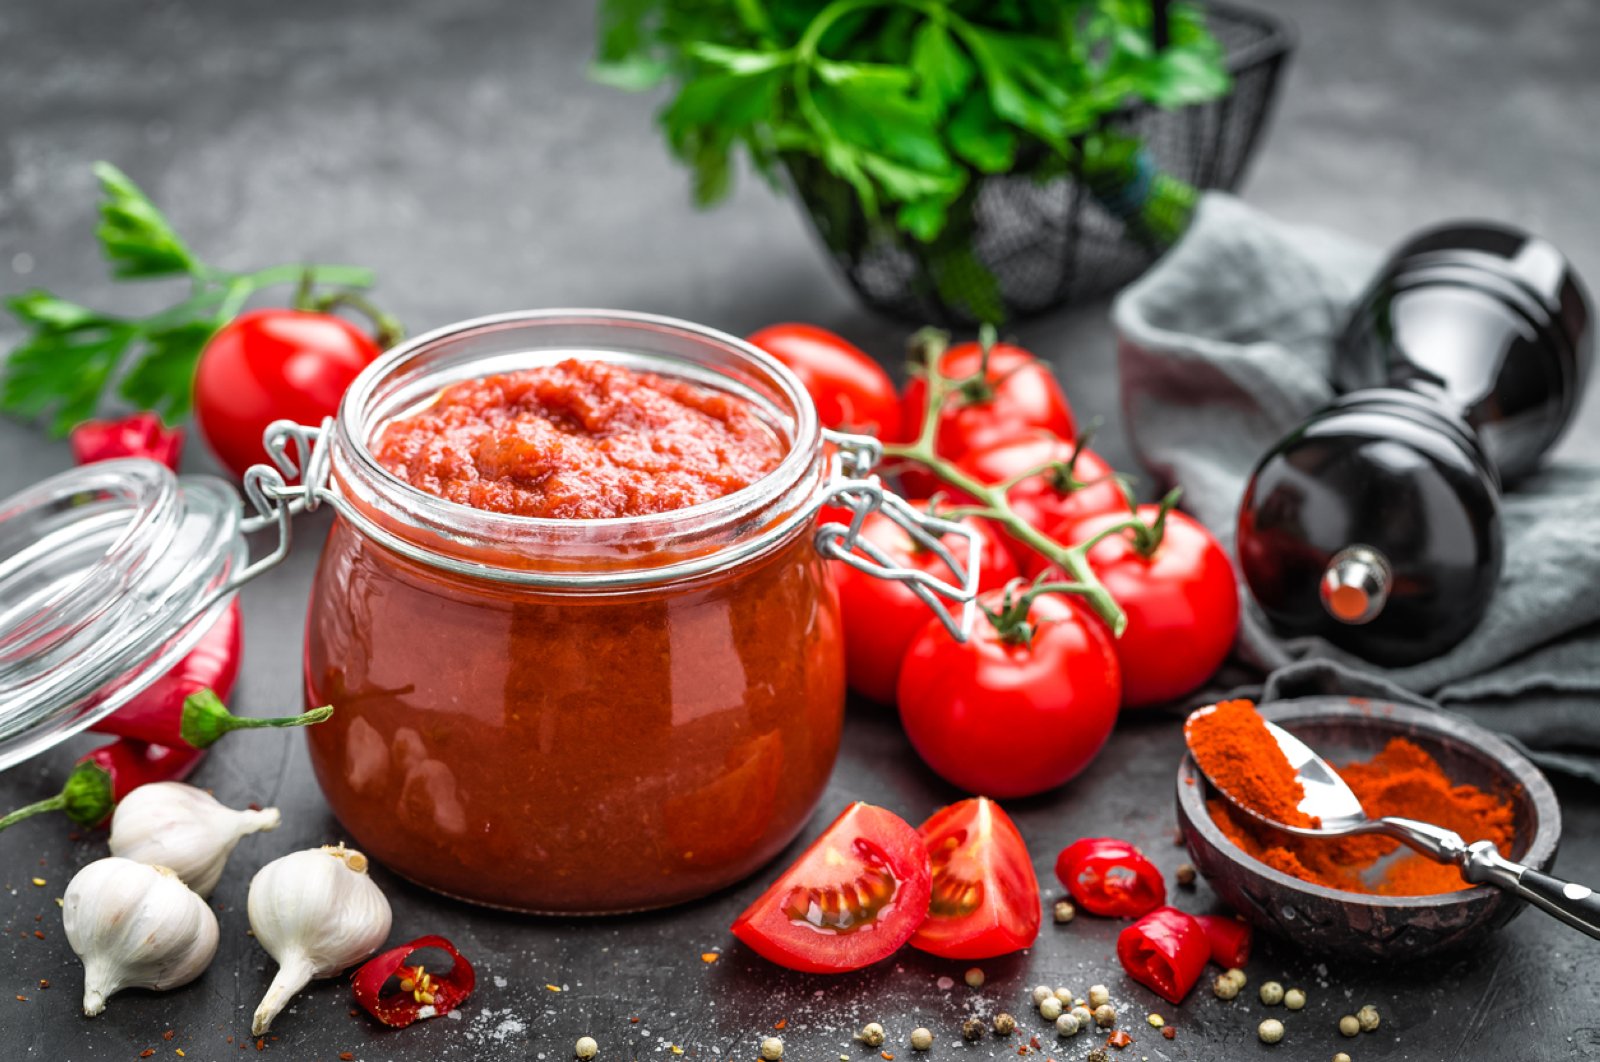 Tomato paste is among the products that saw an increase in exports from Turkey during the Coronavirus pandemic. (iStock Photo by Yelena Yemchuk)